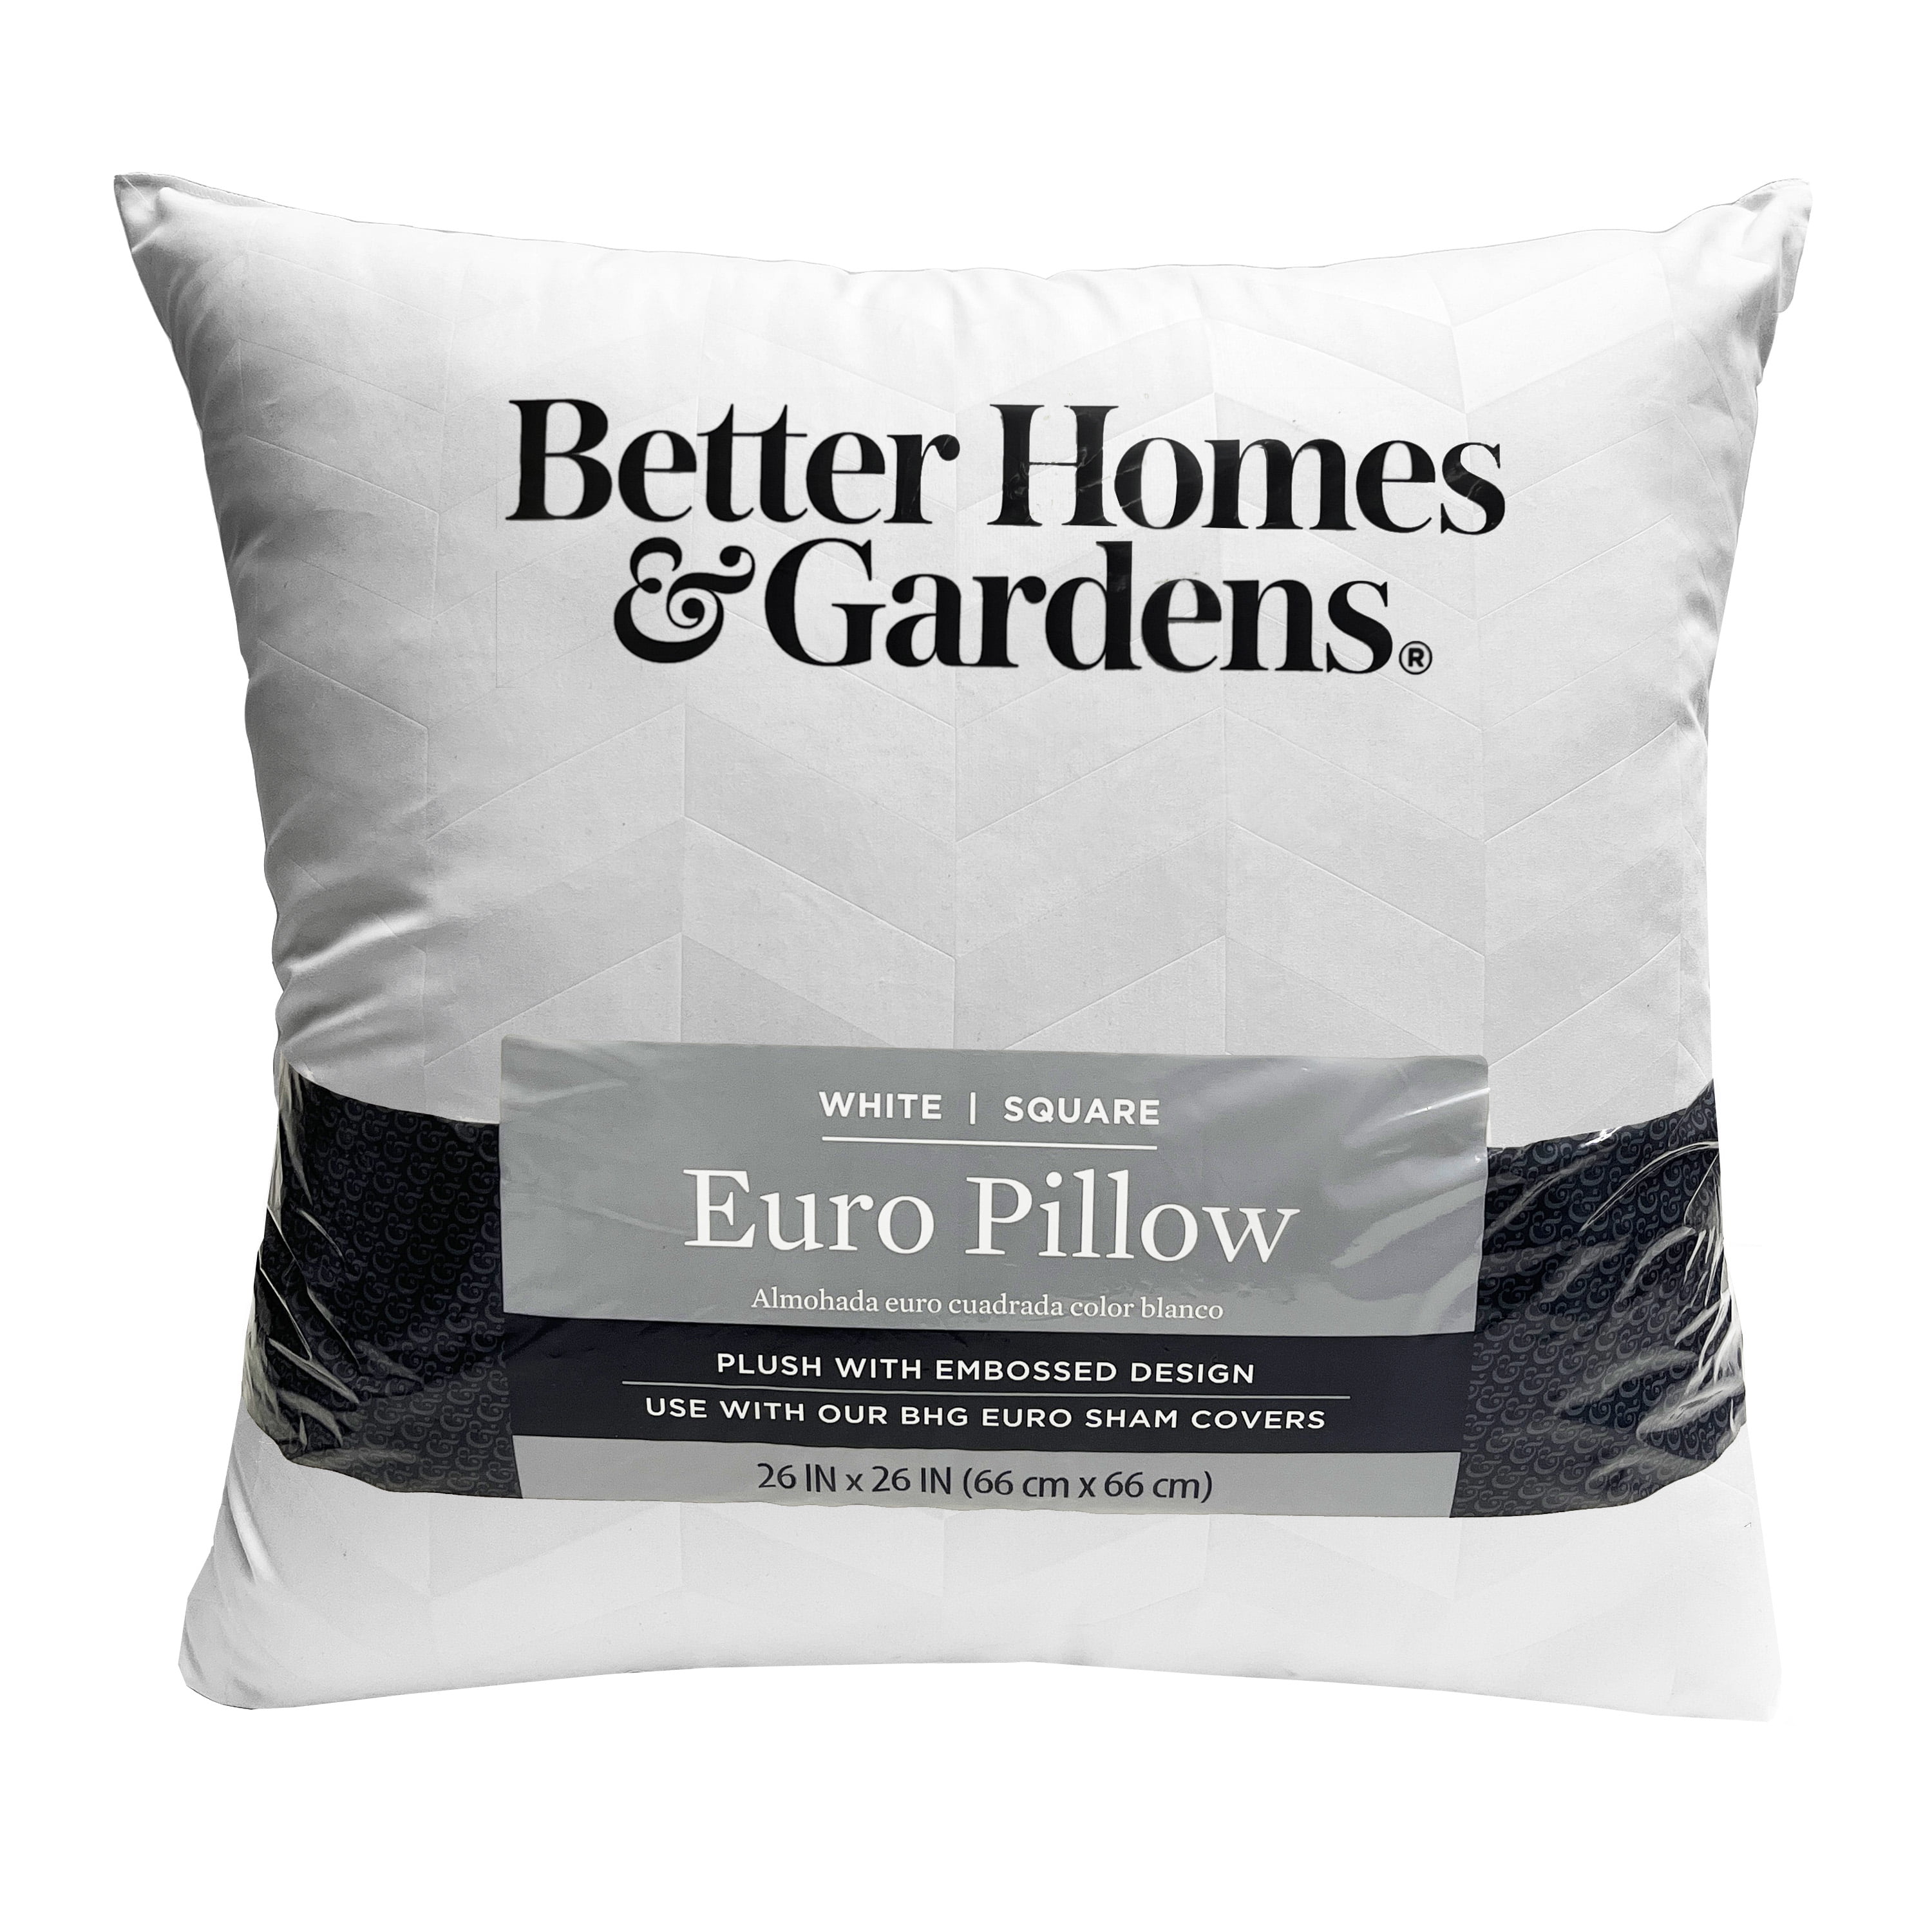 Better Homes and Gardens Euro Pillow